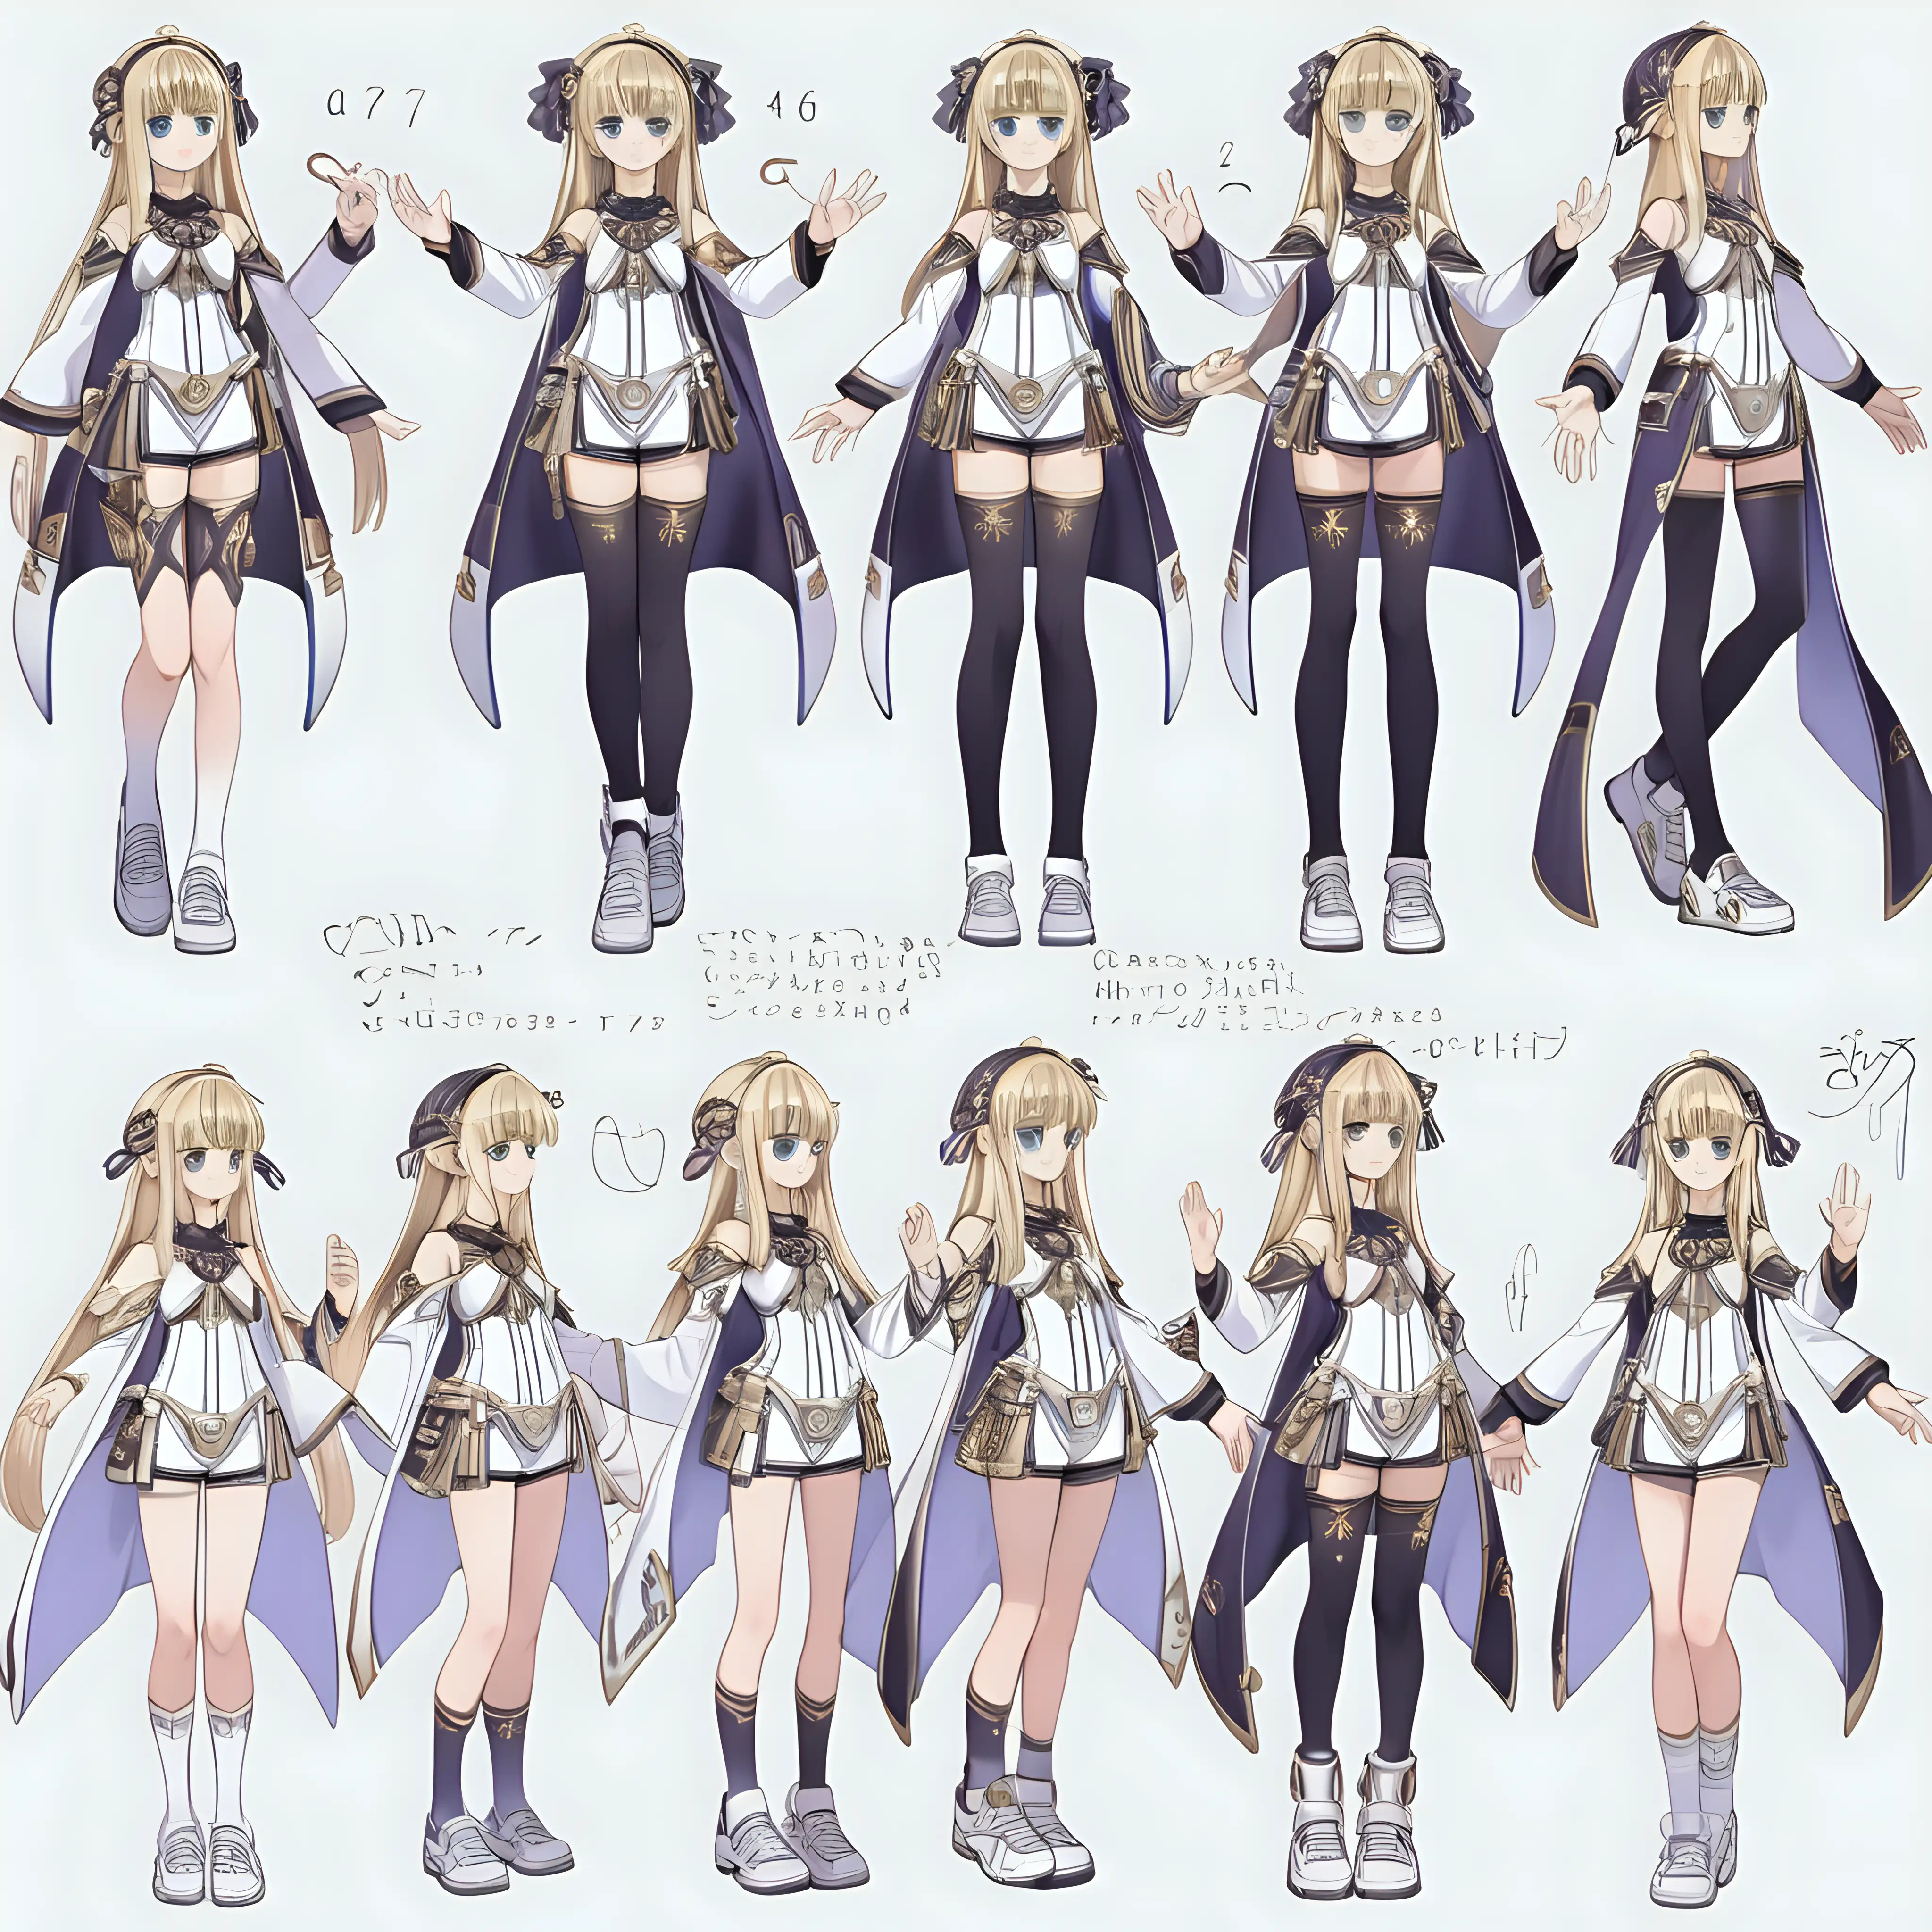 Character design sheet Outfit Full body Anime Light Clothes Complex Simple Pure Cute Brat Anime Girl Knowledge Life Godess Gnostic Evil and Good The will to rival with the entire world Time God Ruliad Regalias Gnosis Imago Pi 7777777777 